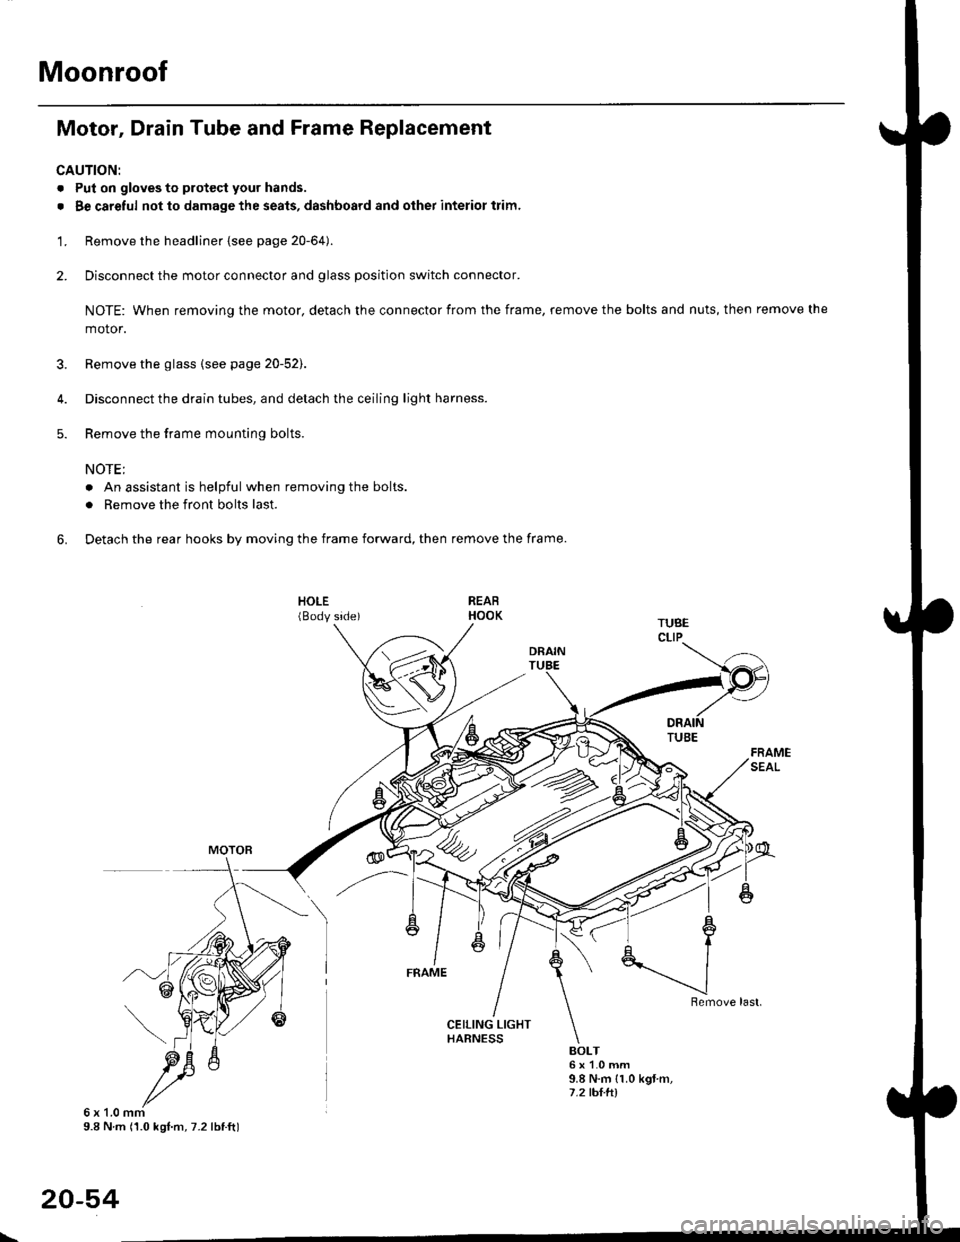 HONDA CIVIC 1998 6.G Workshop Manual Moonroof
Motor, Drain Tube and Frame Replacement
CAUTION:
. Put on gloves to protecl your hands.
. Be careful not to damage the seats, dashboard and other interior trim.
1. Remove the headliner {see 